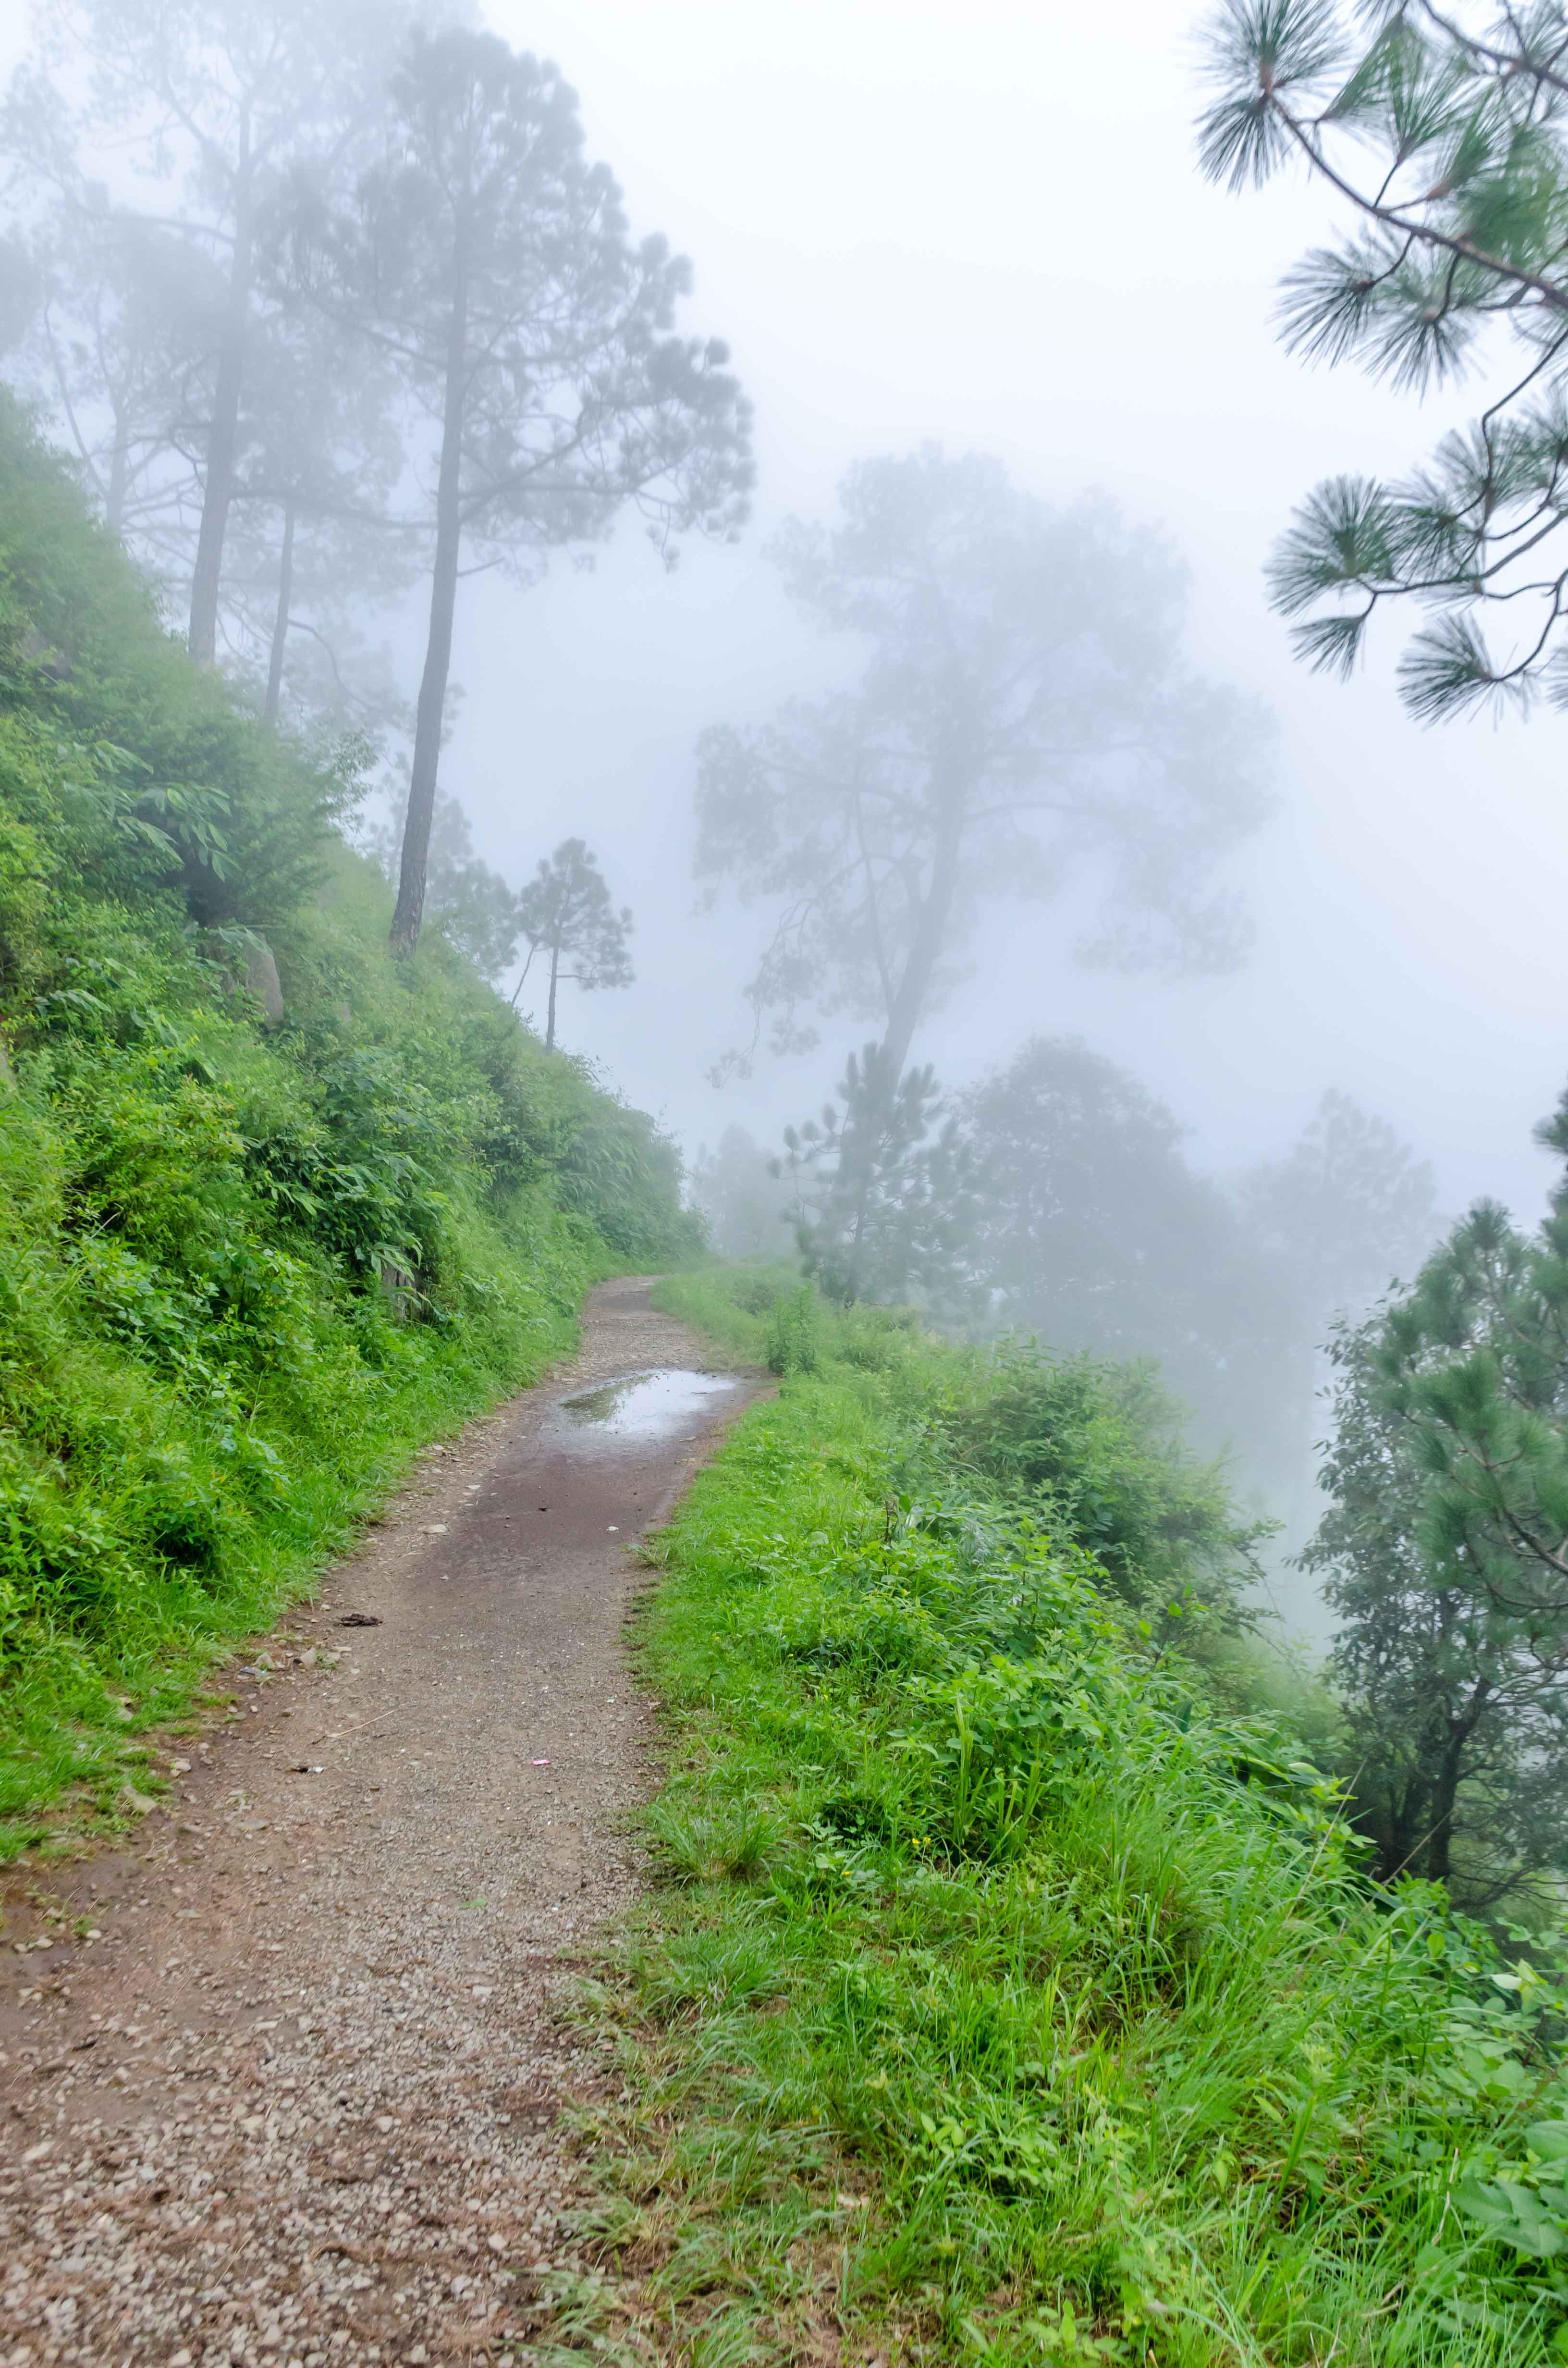 A Collection of Memorable Photographs from Kasauli